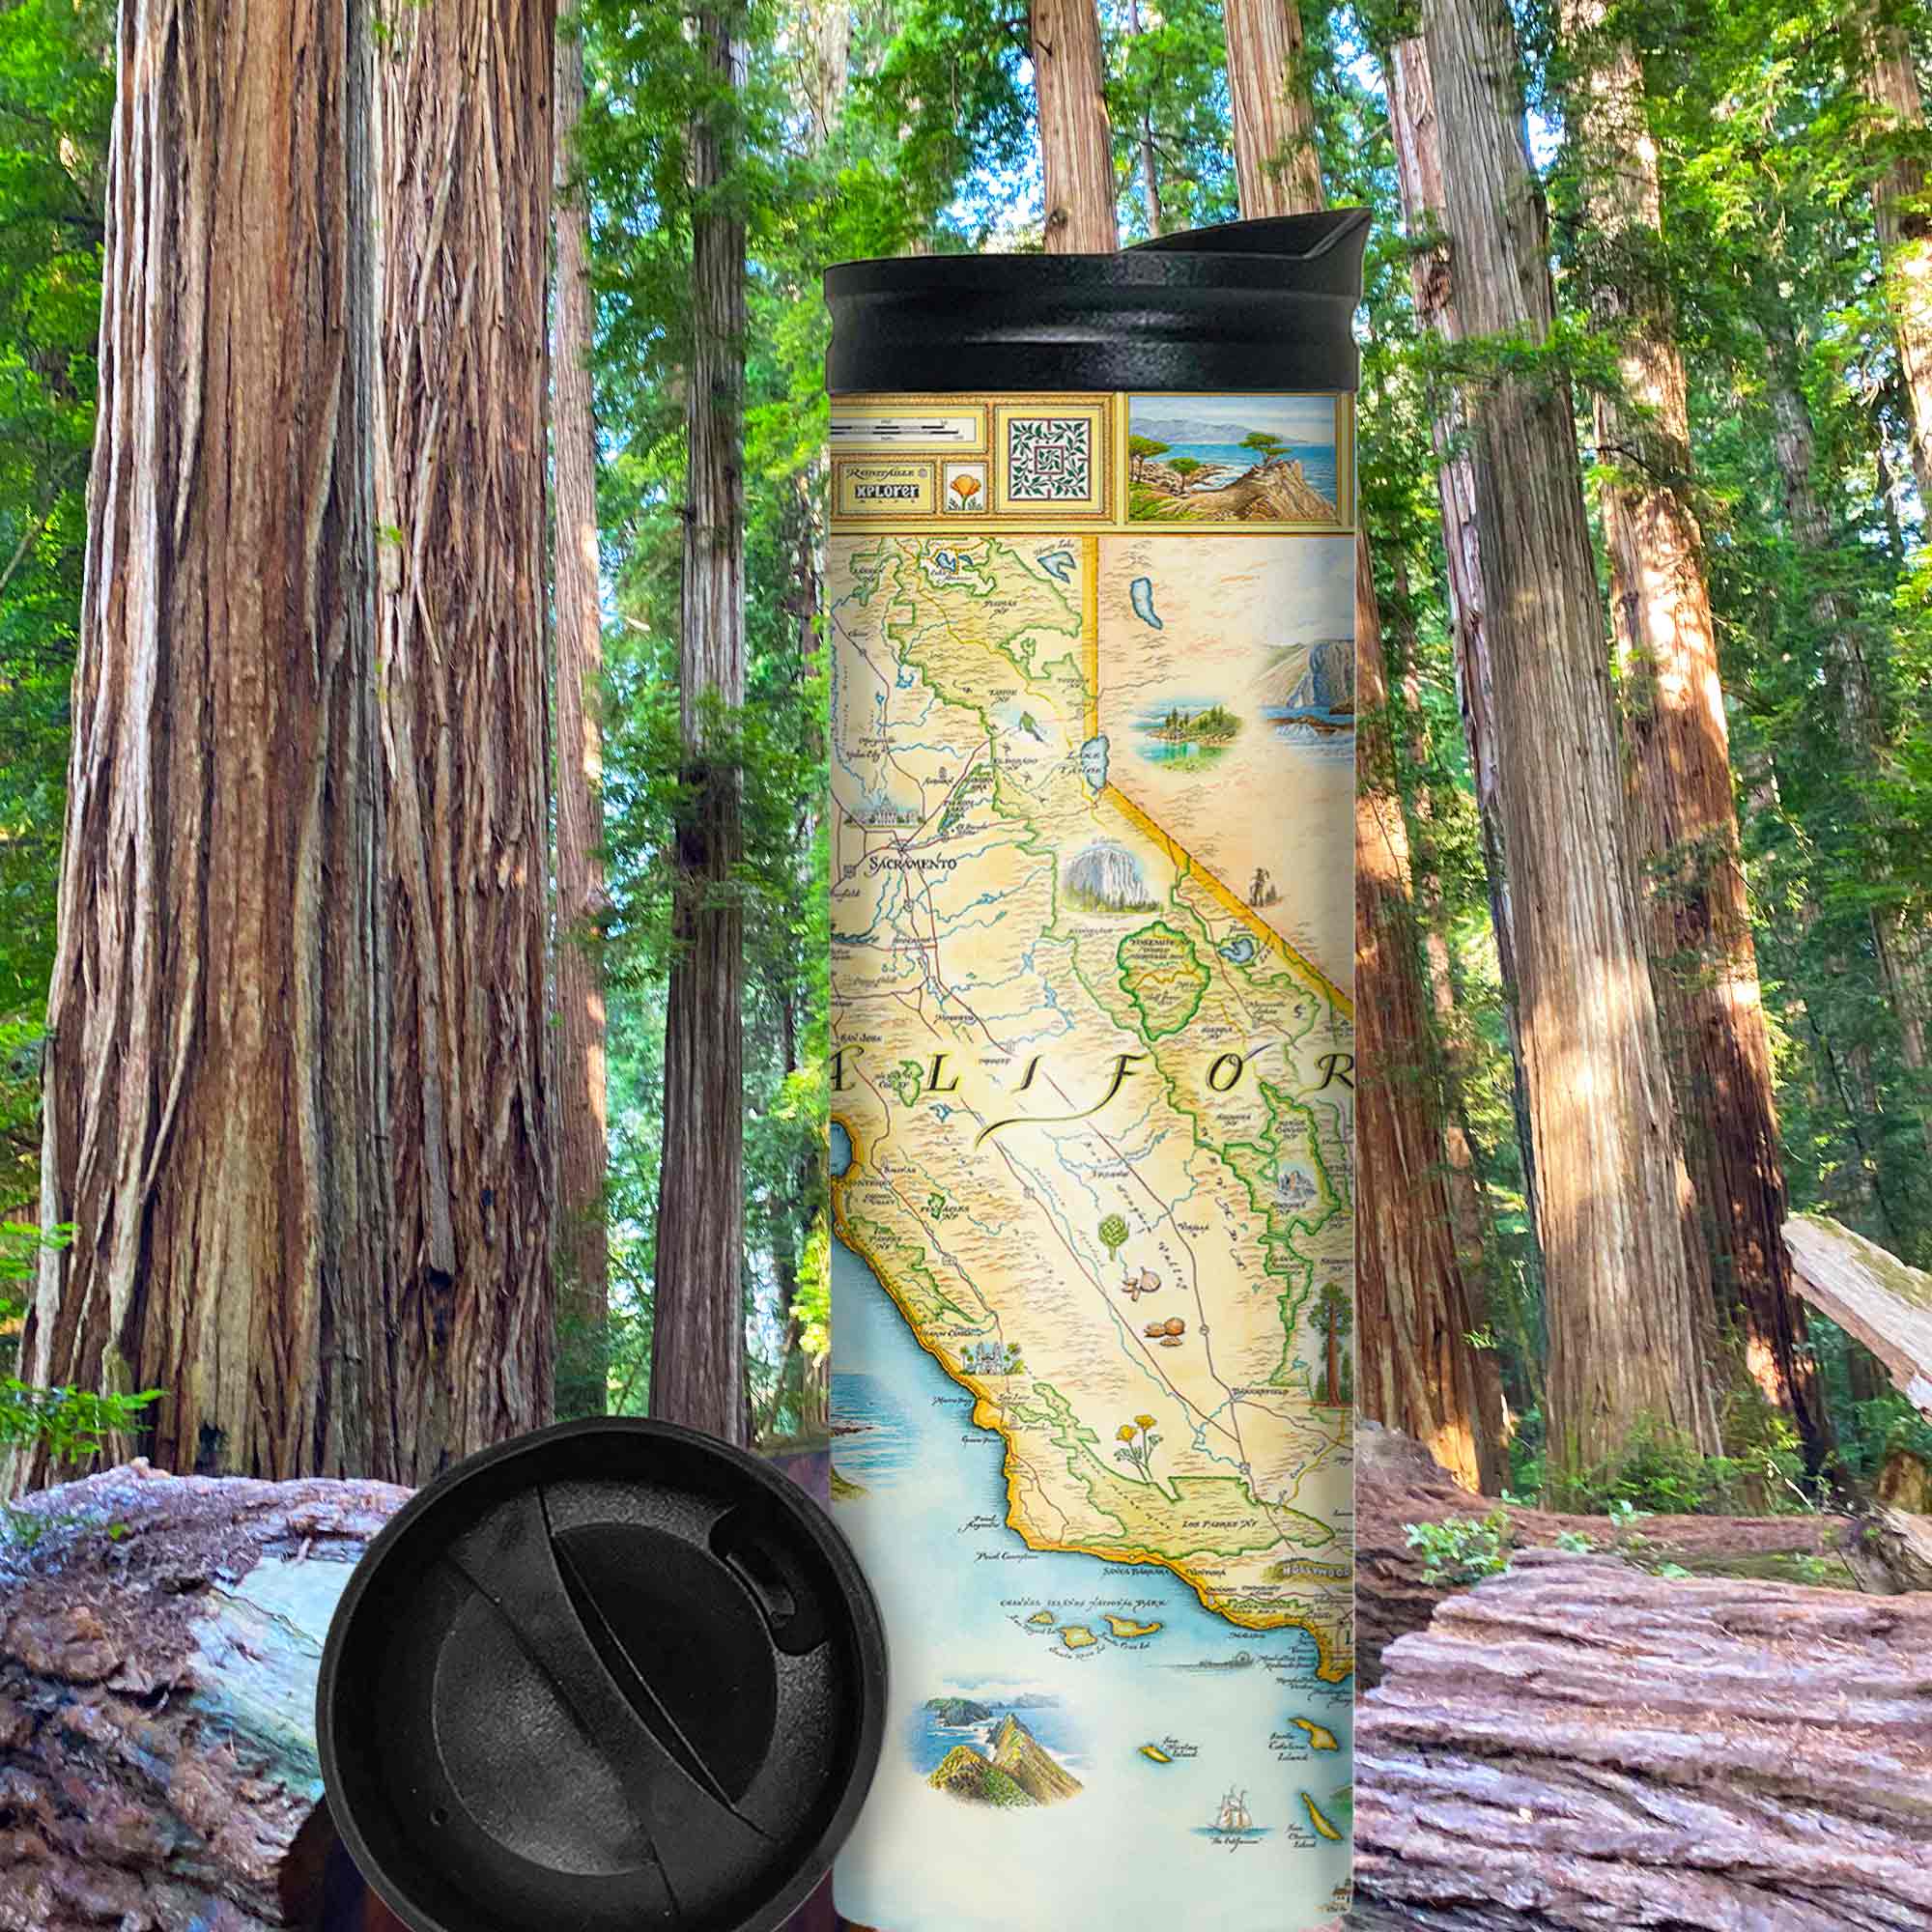  California State Map 16 oz Travel Drinkware sitting in the Redwood National Park by trees. Featured on the map are birds whales, seals, otters, and butterflies. Cultural landmarks of Hearst Castle, Ranchers of Montana De Oro, Dunites of Oceano Dunes, Redwoods, and Native people that have lived on this land for thousands of years from San Francisco to Los Angeles. Some cities you will find are Arroyo Grande, San Luis Obispo, Morro Bay, and Paso Robles.  